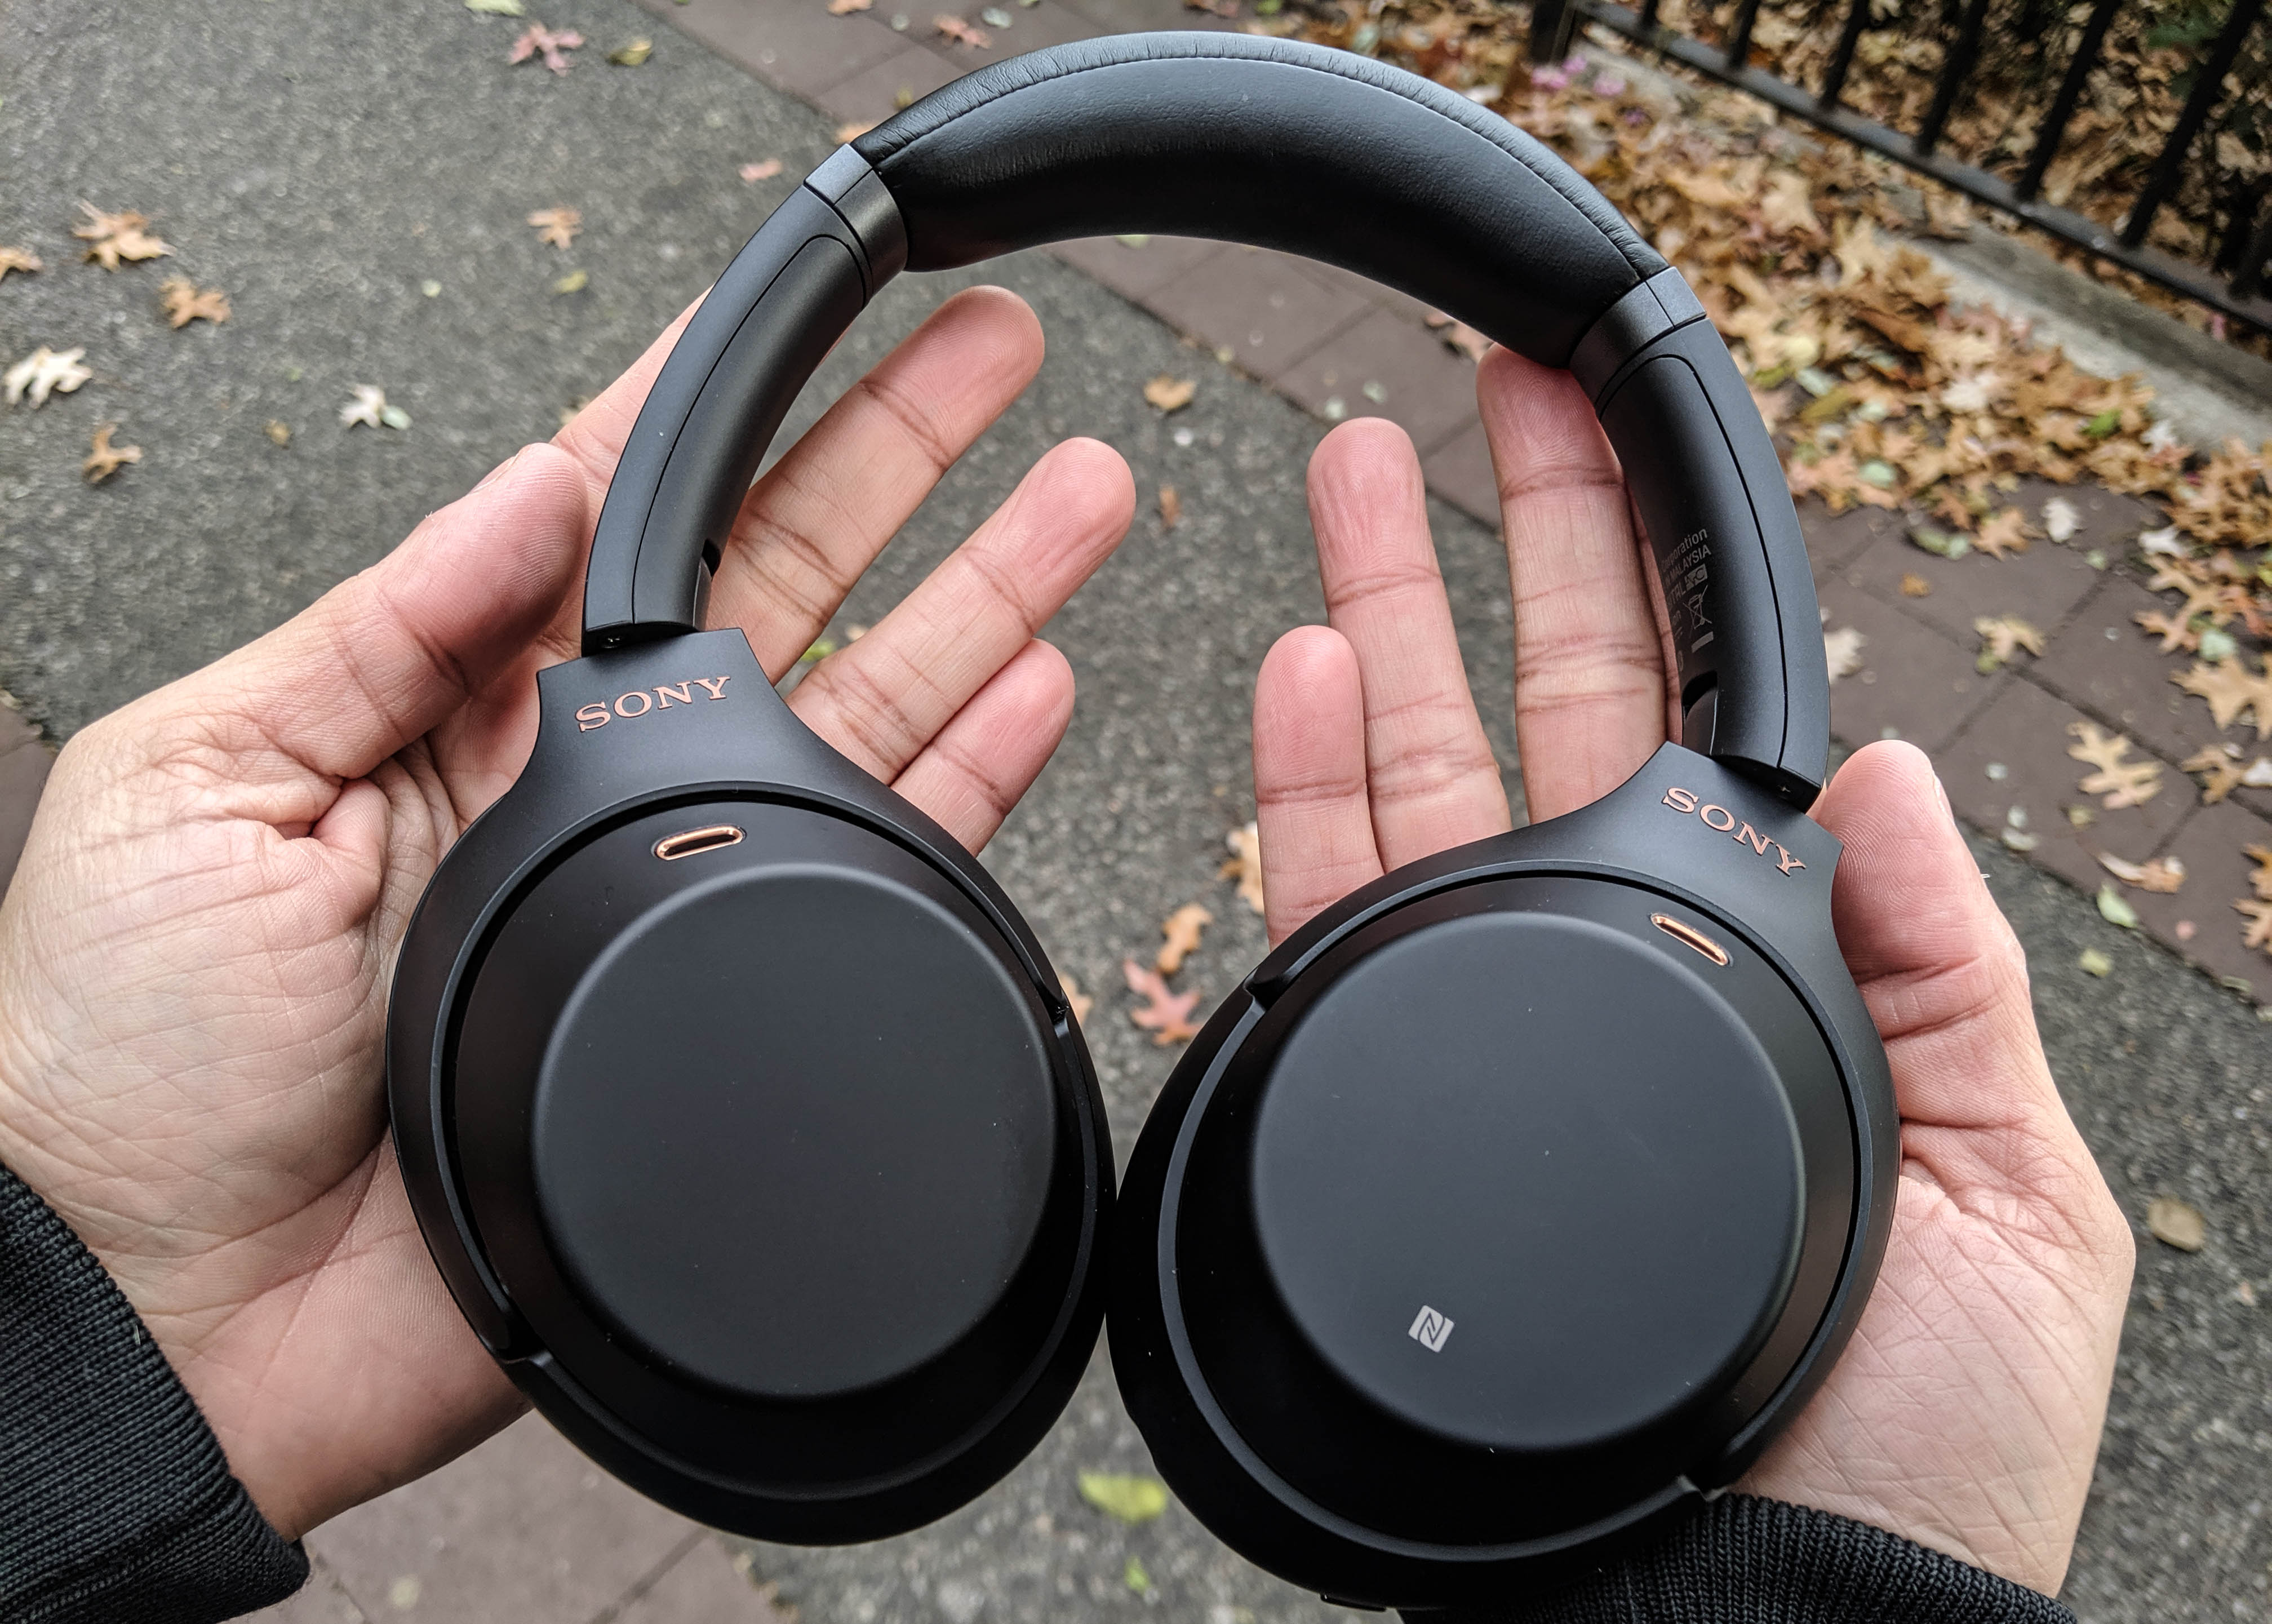 best Sony headphones and earbuds: Sony WH-1000XM3